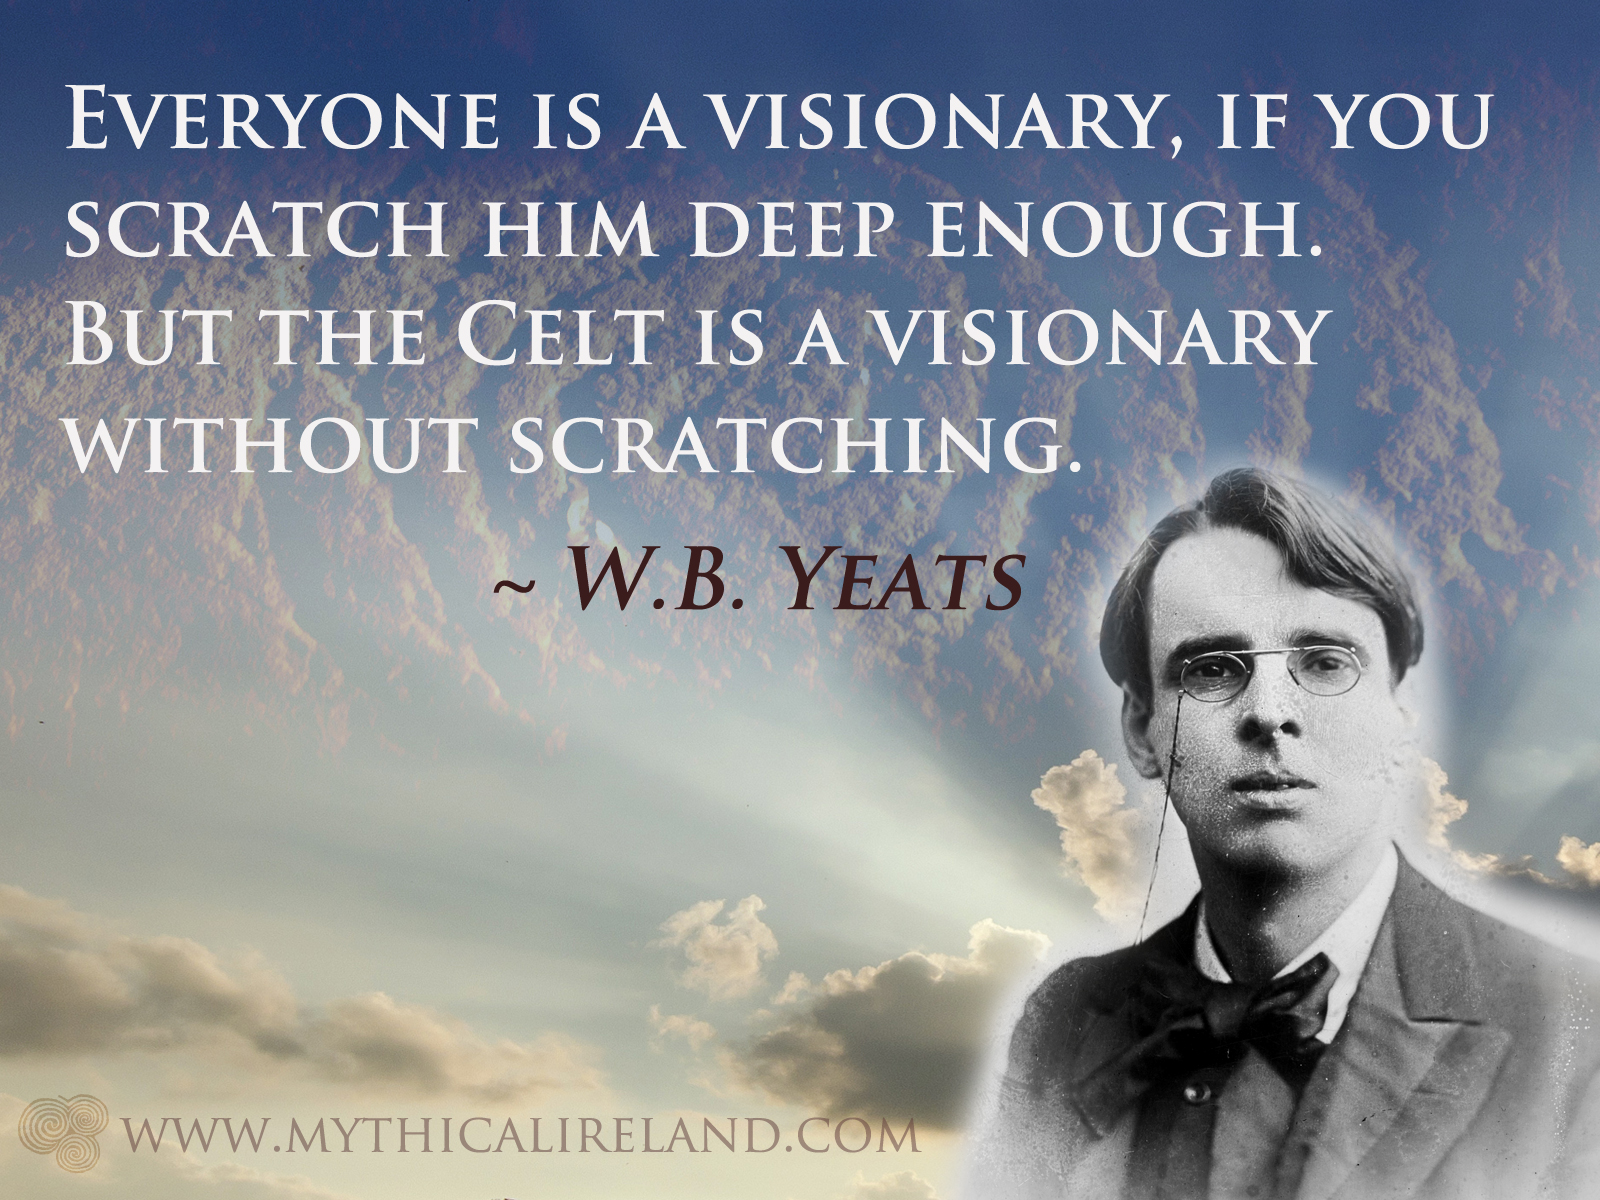 Quote about the Celt from Irish poet W B Yeats